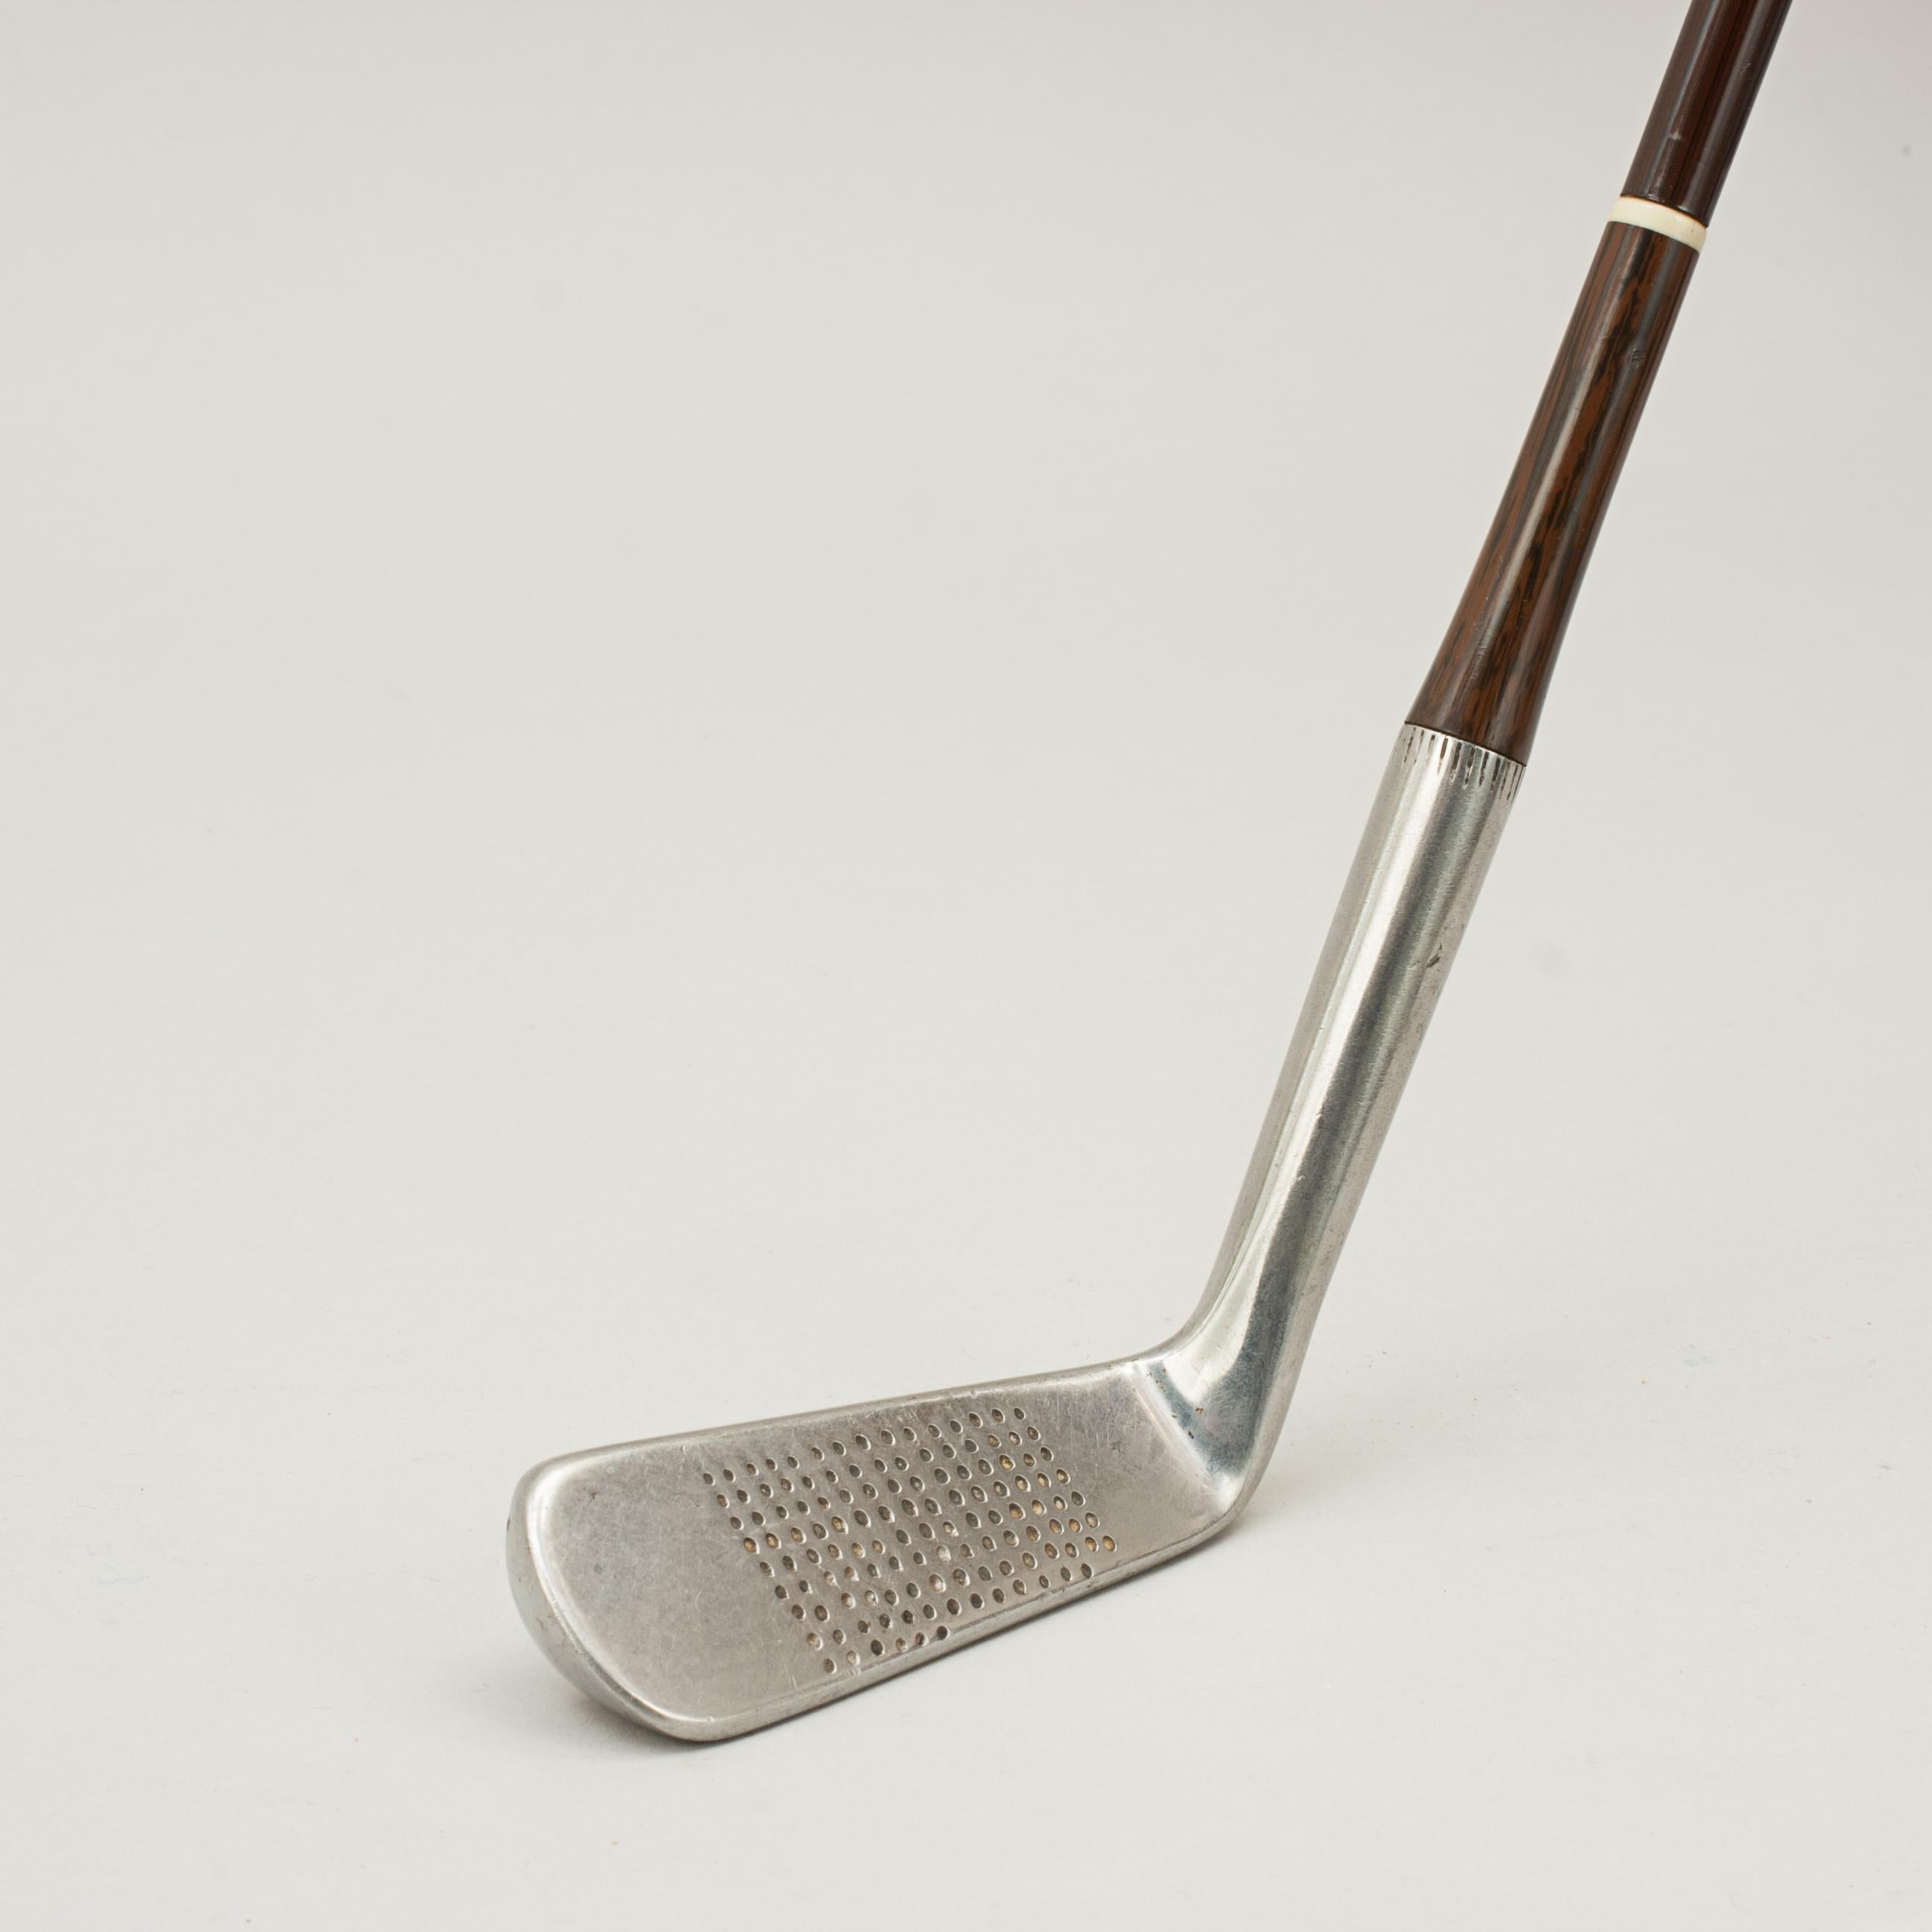 Lillywhite's 'Nonfooze' Steel Shafted Golf Club, Chipper 5